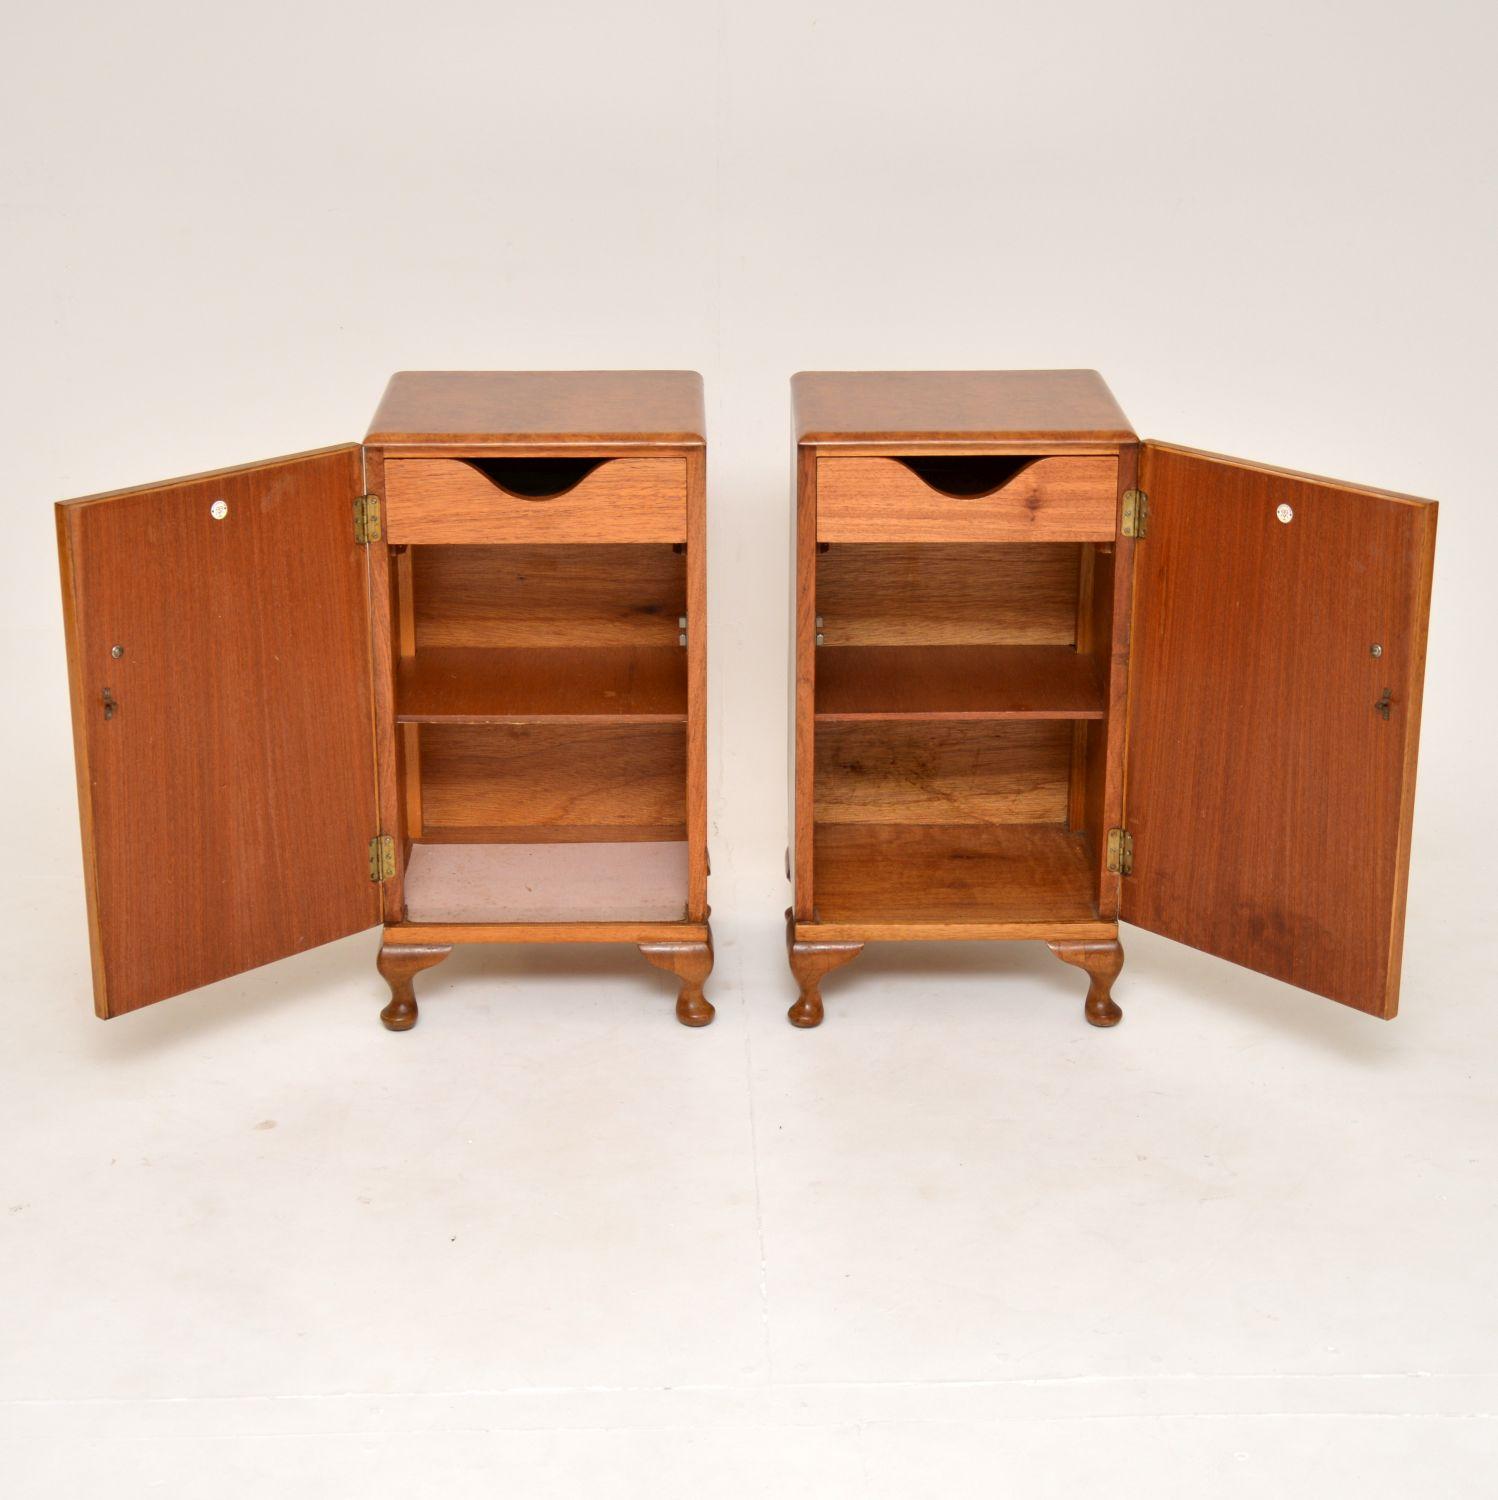 Pair of Antique Burr Walnut Bedside Cabinets In Good Condition For Sale In London, GB